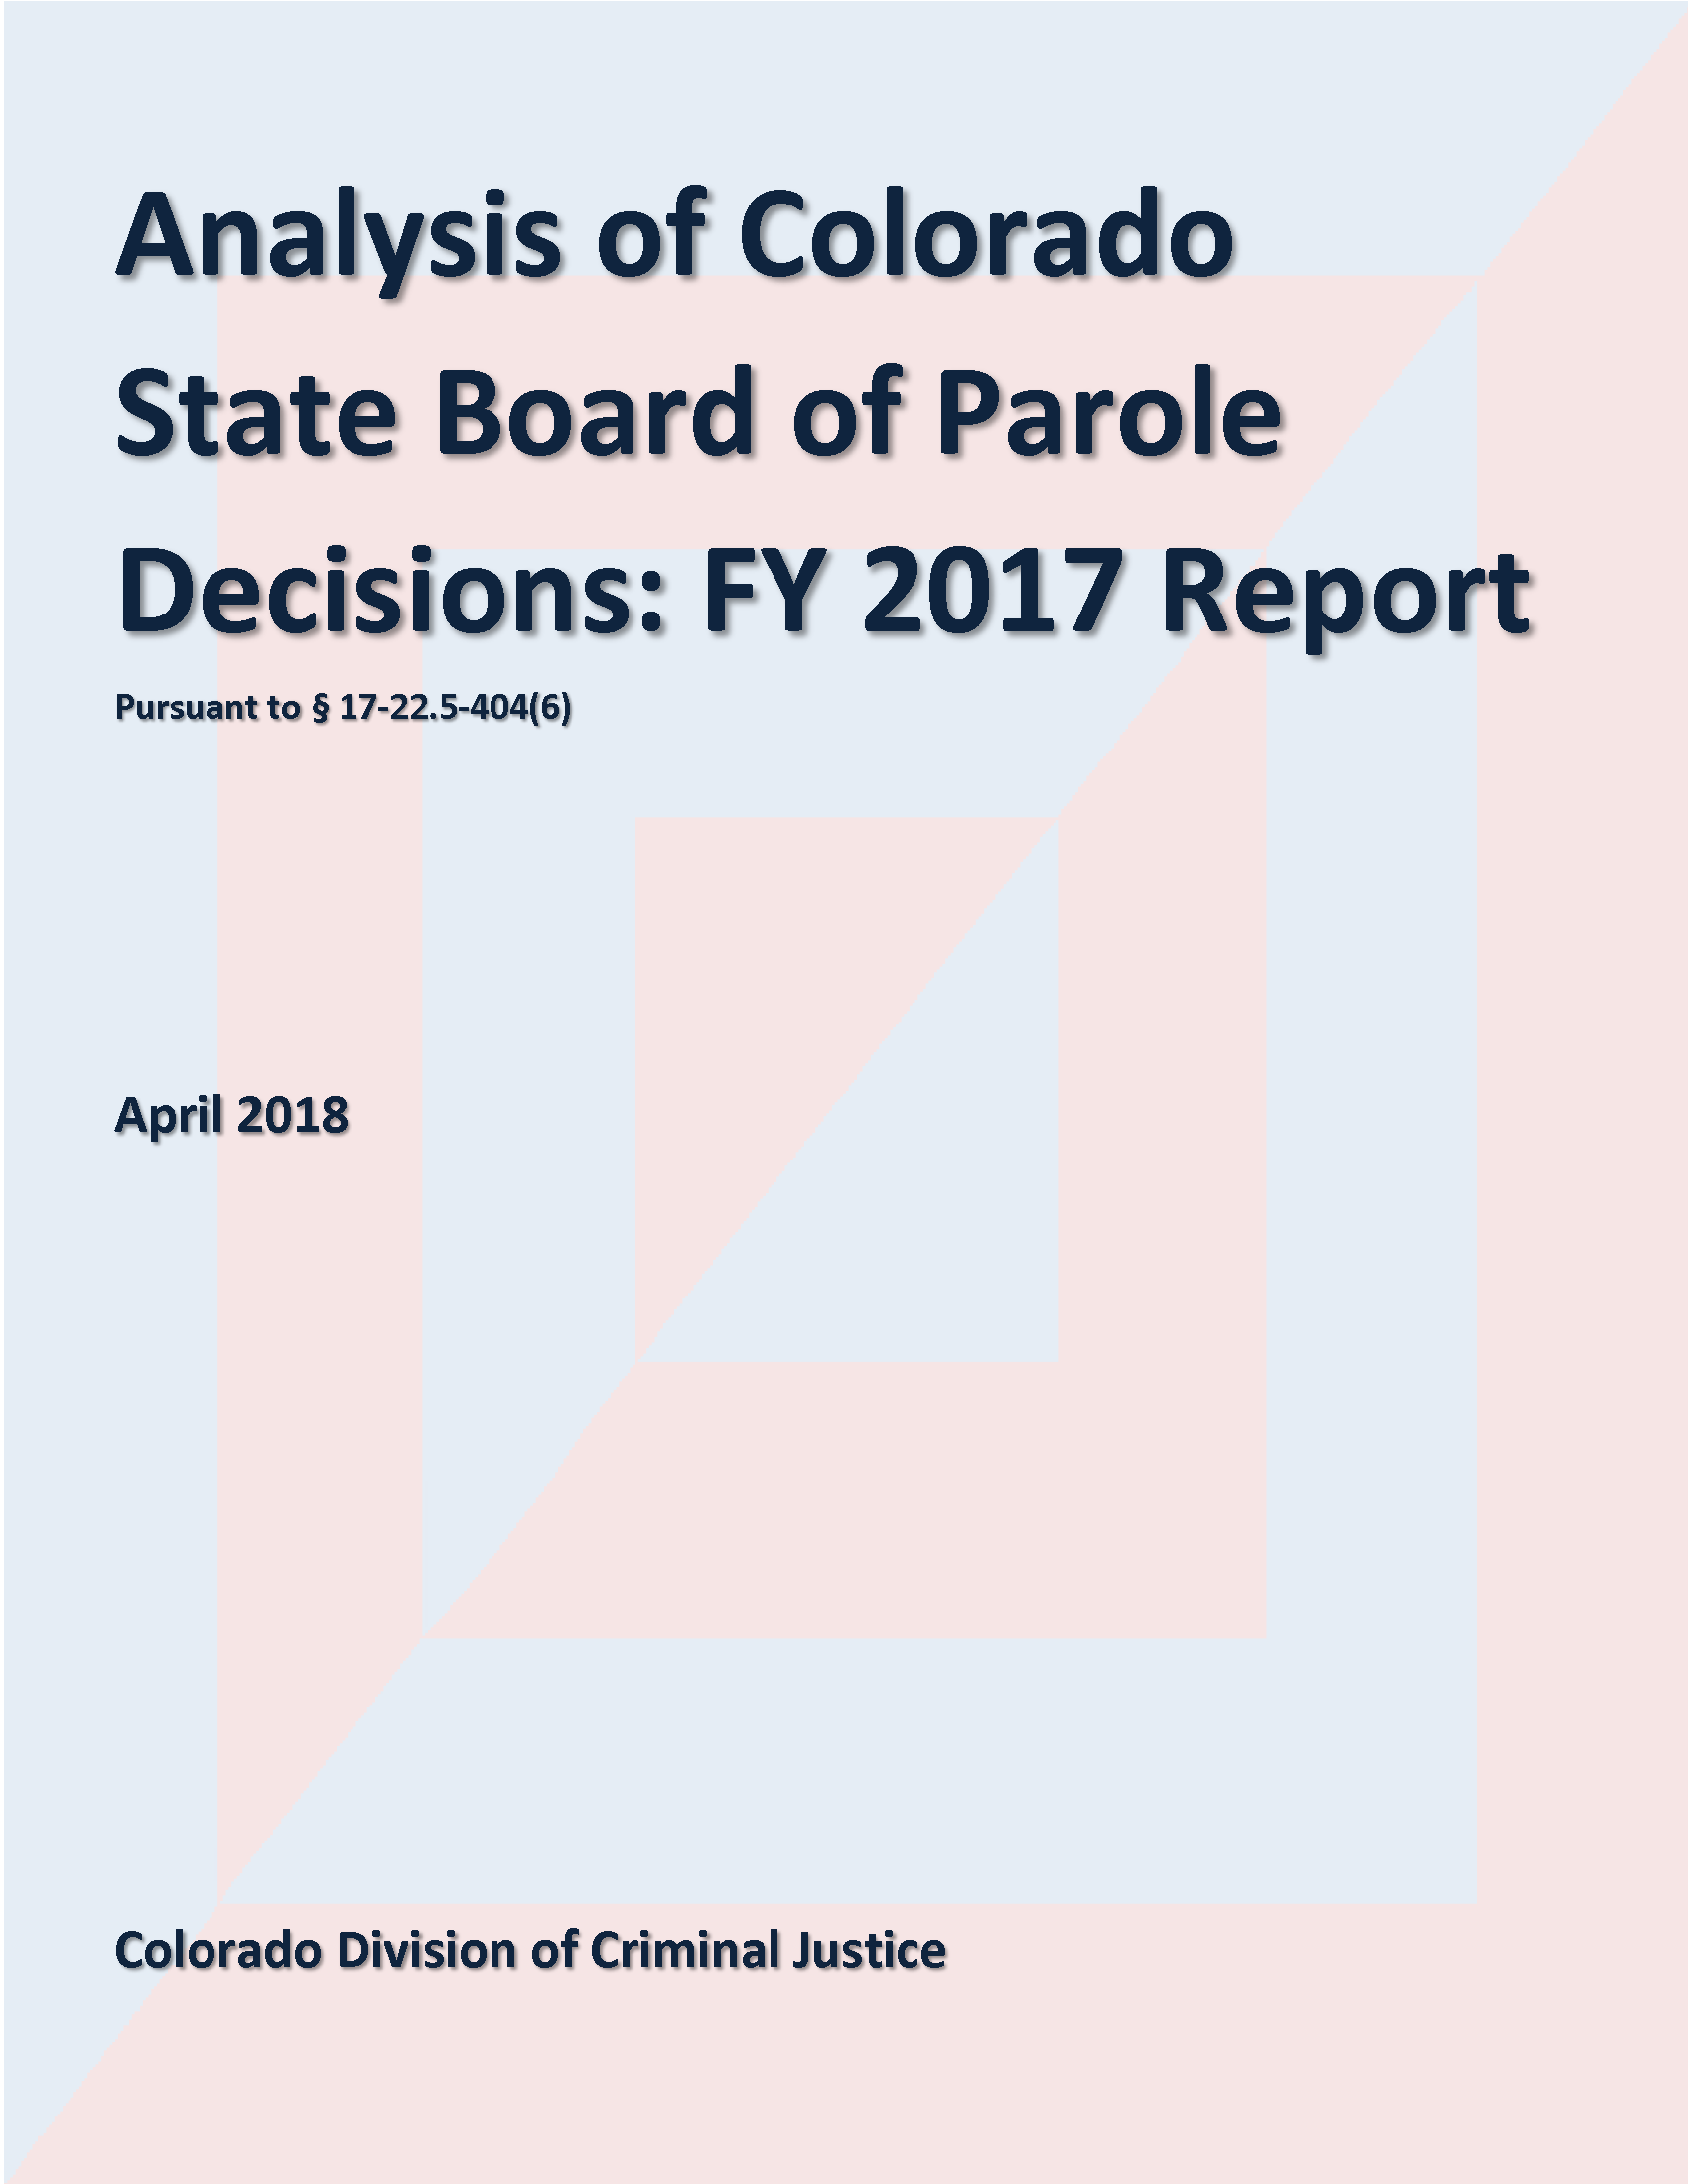 Analysis of Colorado State Board of Parole Decisions: FY 2017 Report (April 2018)